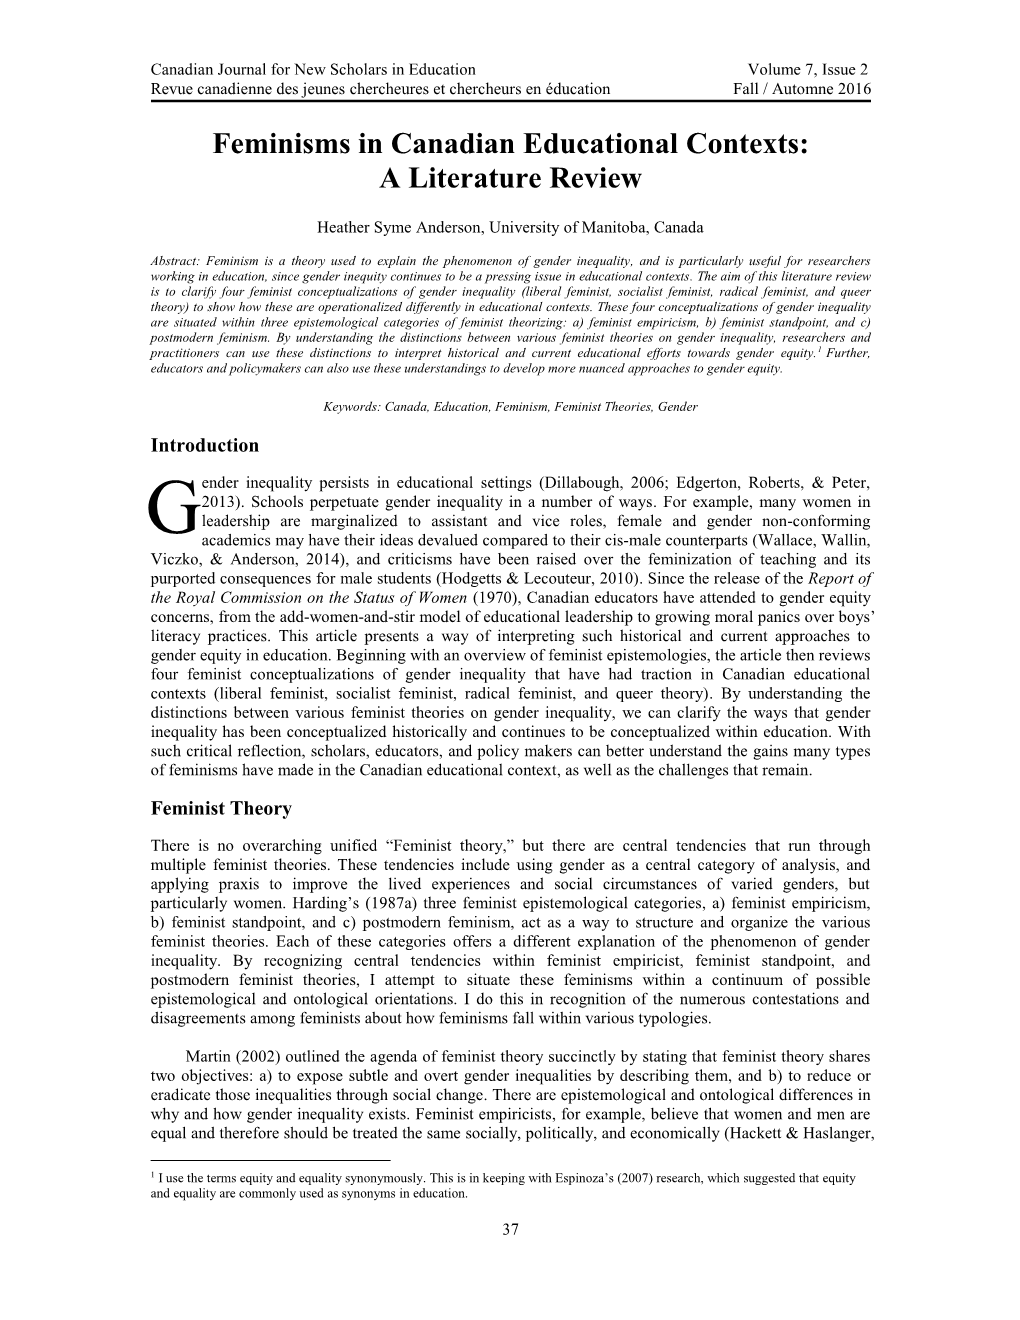 Feminisms in Canadian Educational Contexts: a Literature Review